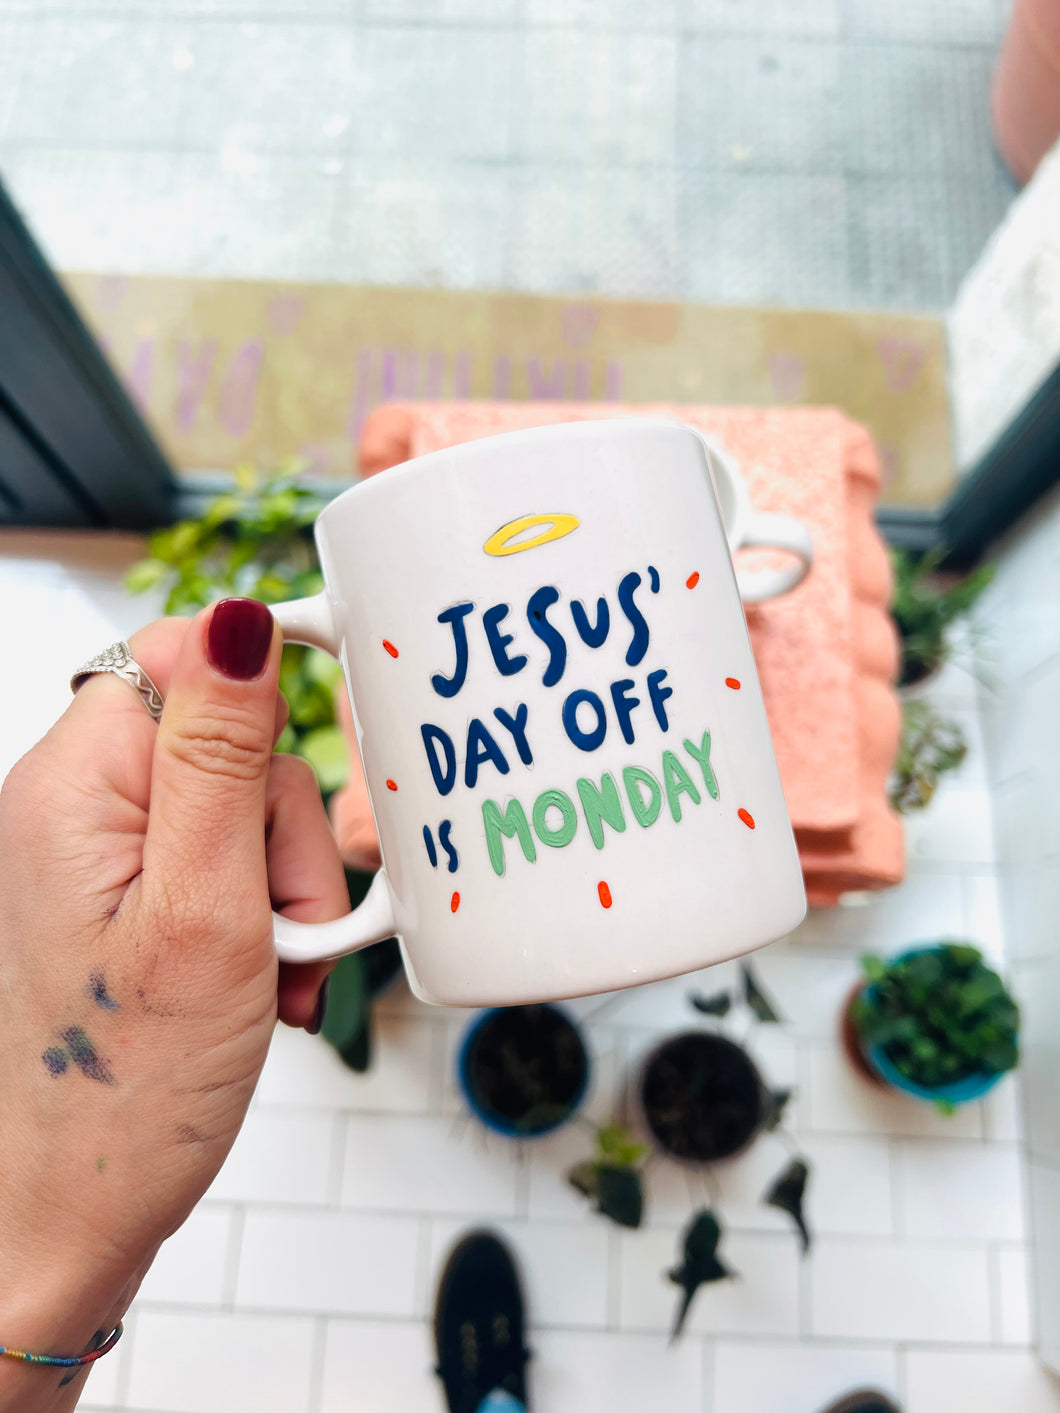 Jesus’ day off is MONDAY